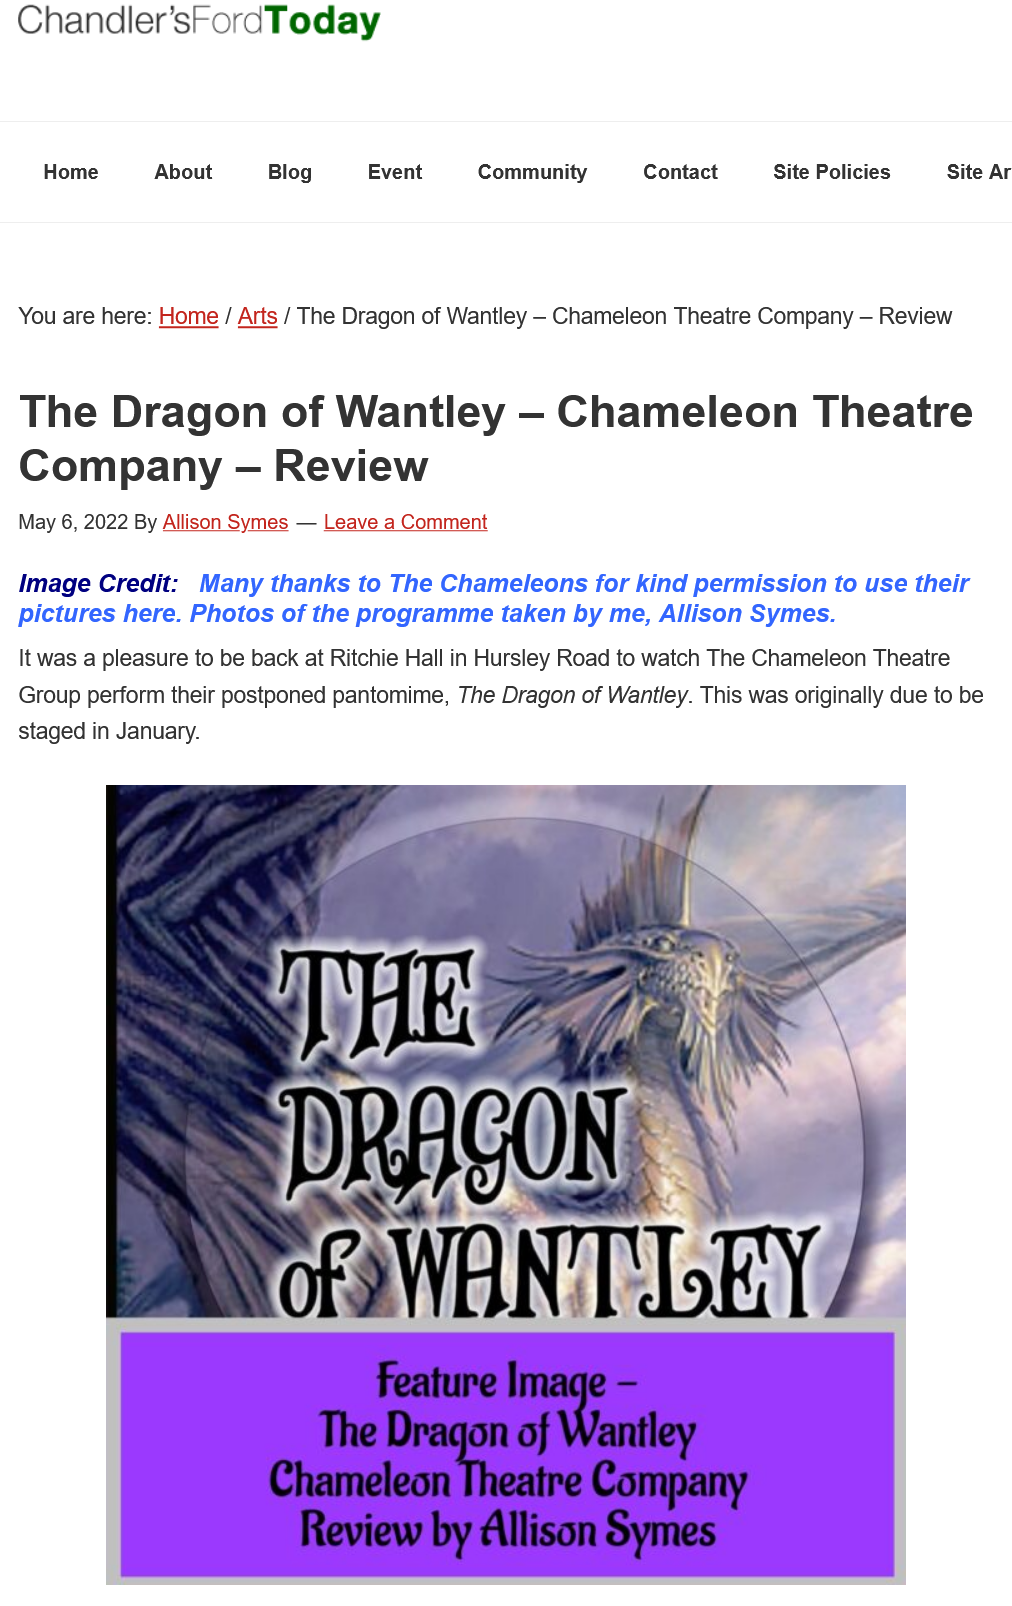 Screenshot 2022-05-06 at 17-04-28 The Dragon of Wantley - Chameleon Theatre Company - Review - Chandler's Ford Today